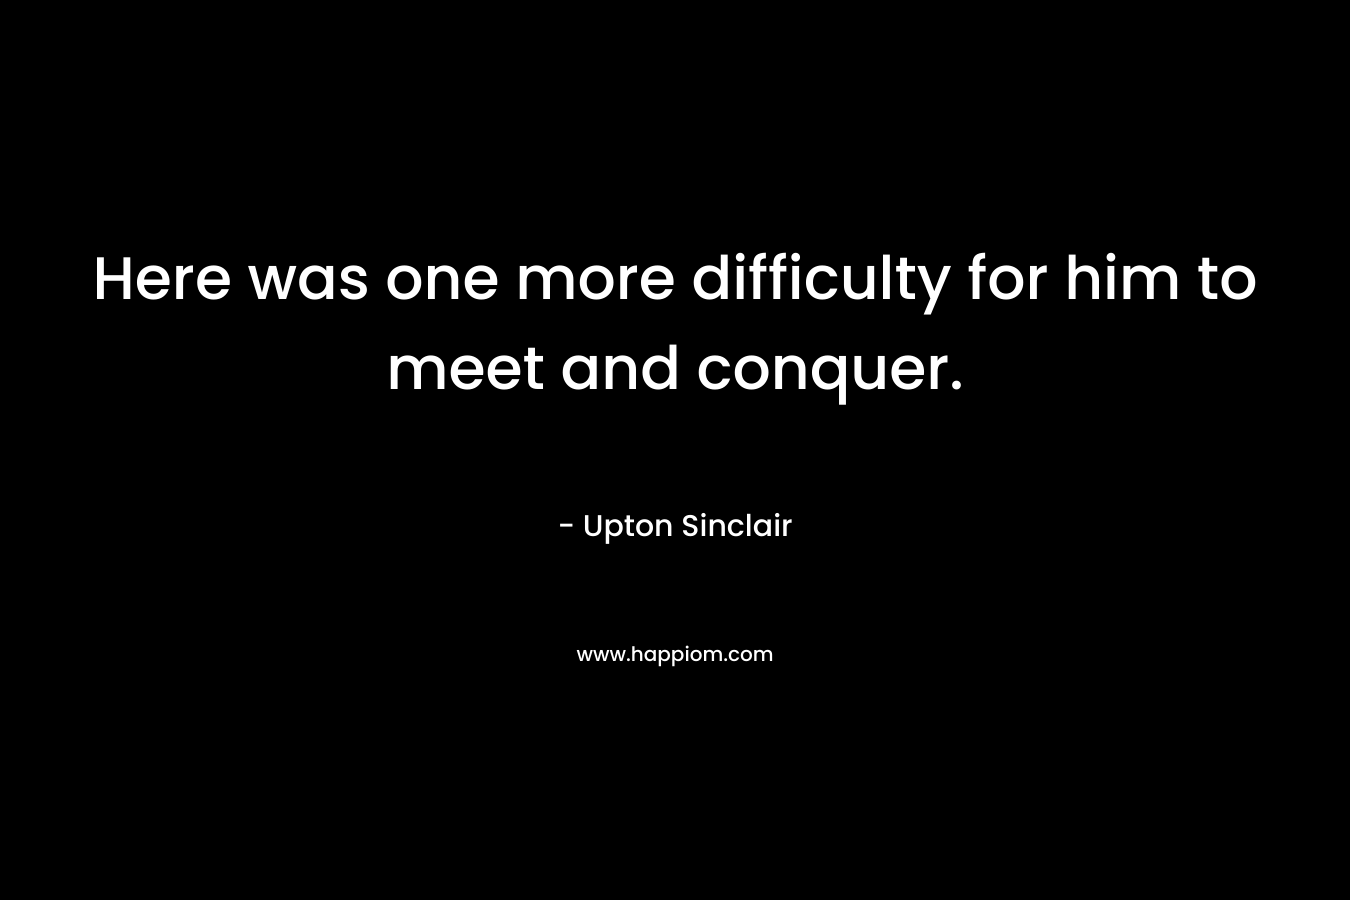 Here was one more difficulty for him to meet and conquer. – Upton Sinclair